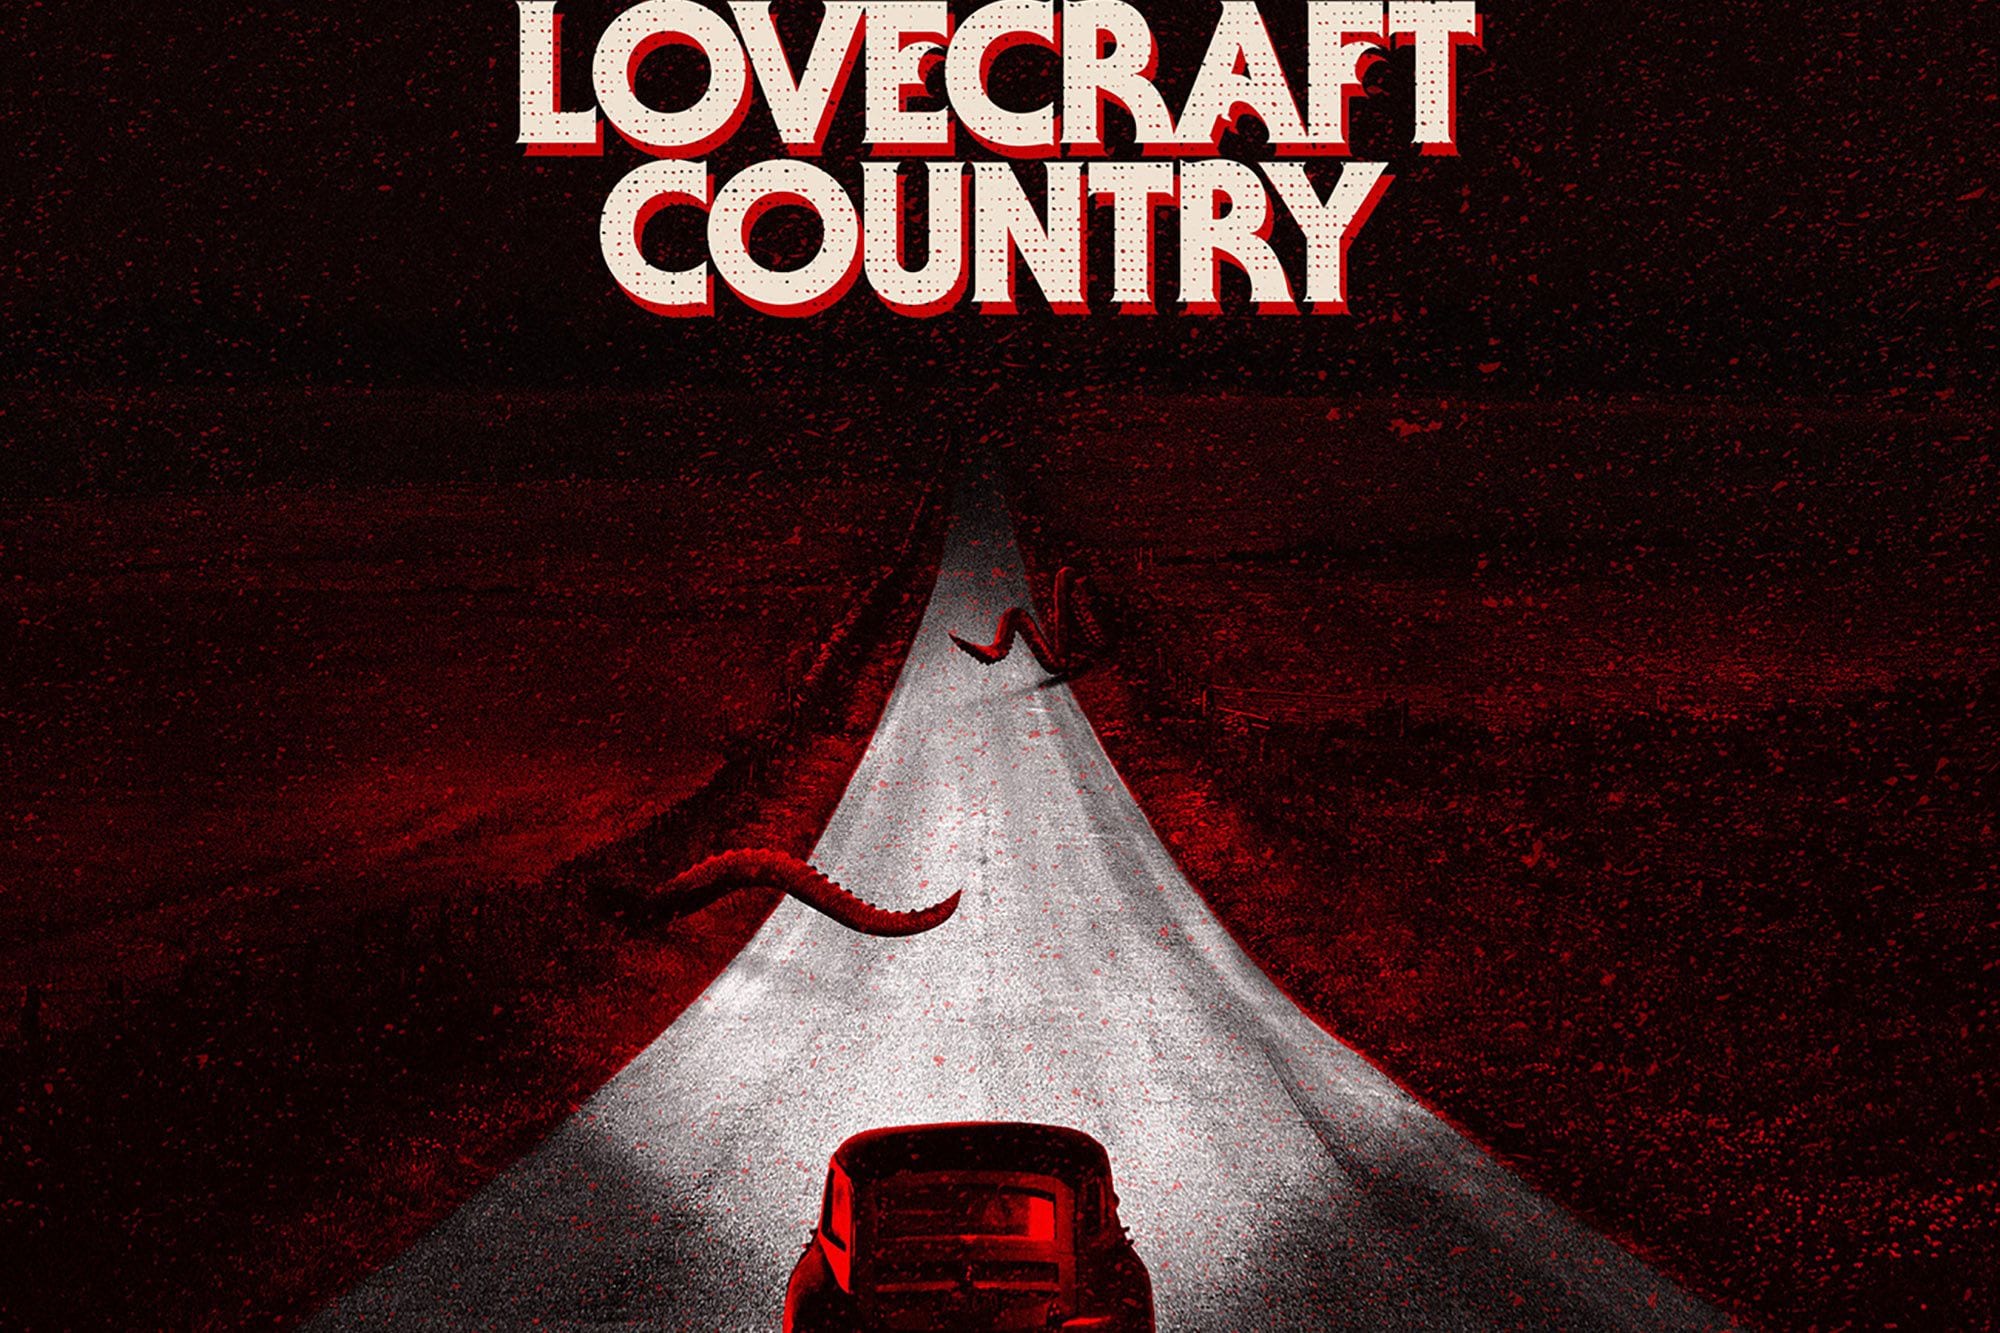 lovecraft country (novel)